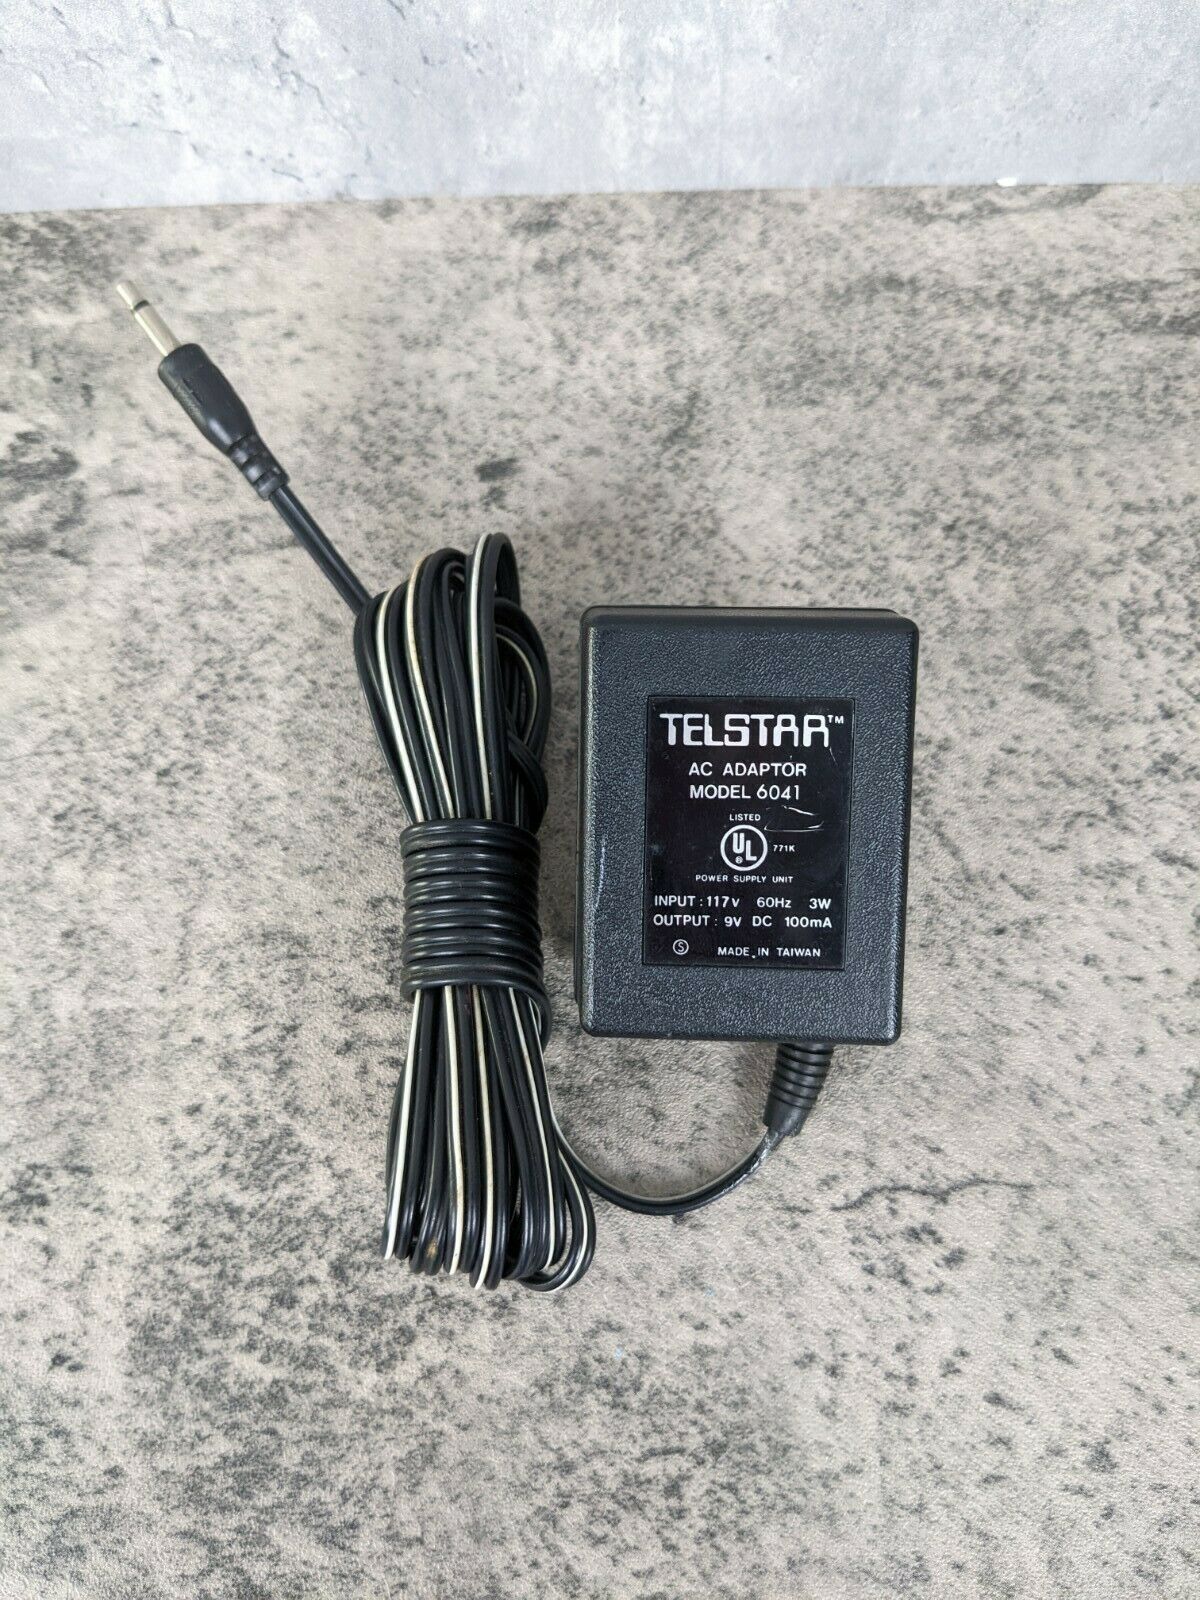 Vintage Coleco Telstar AC Adapter 6041 Original Power Cord Tested Brand: Coleco Type: AC/DC Adapter Compatible Model - Click Image to Close